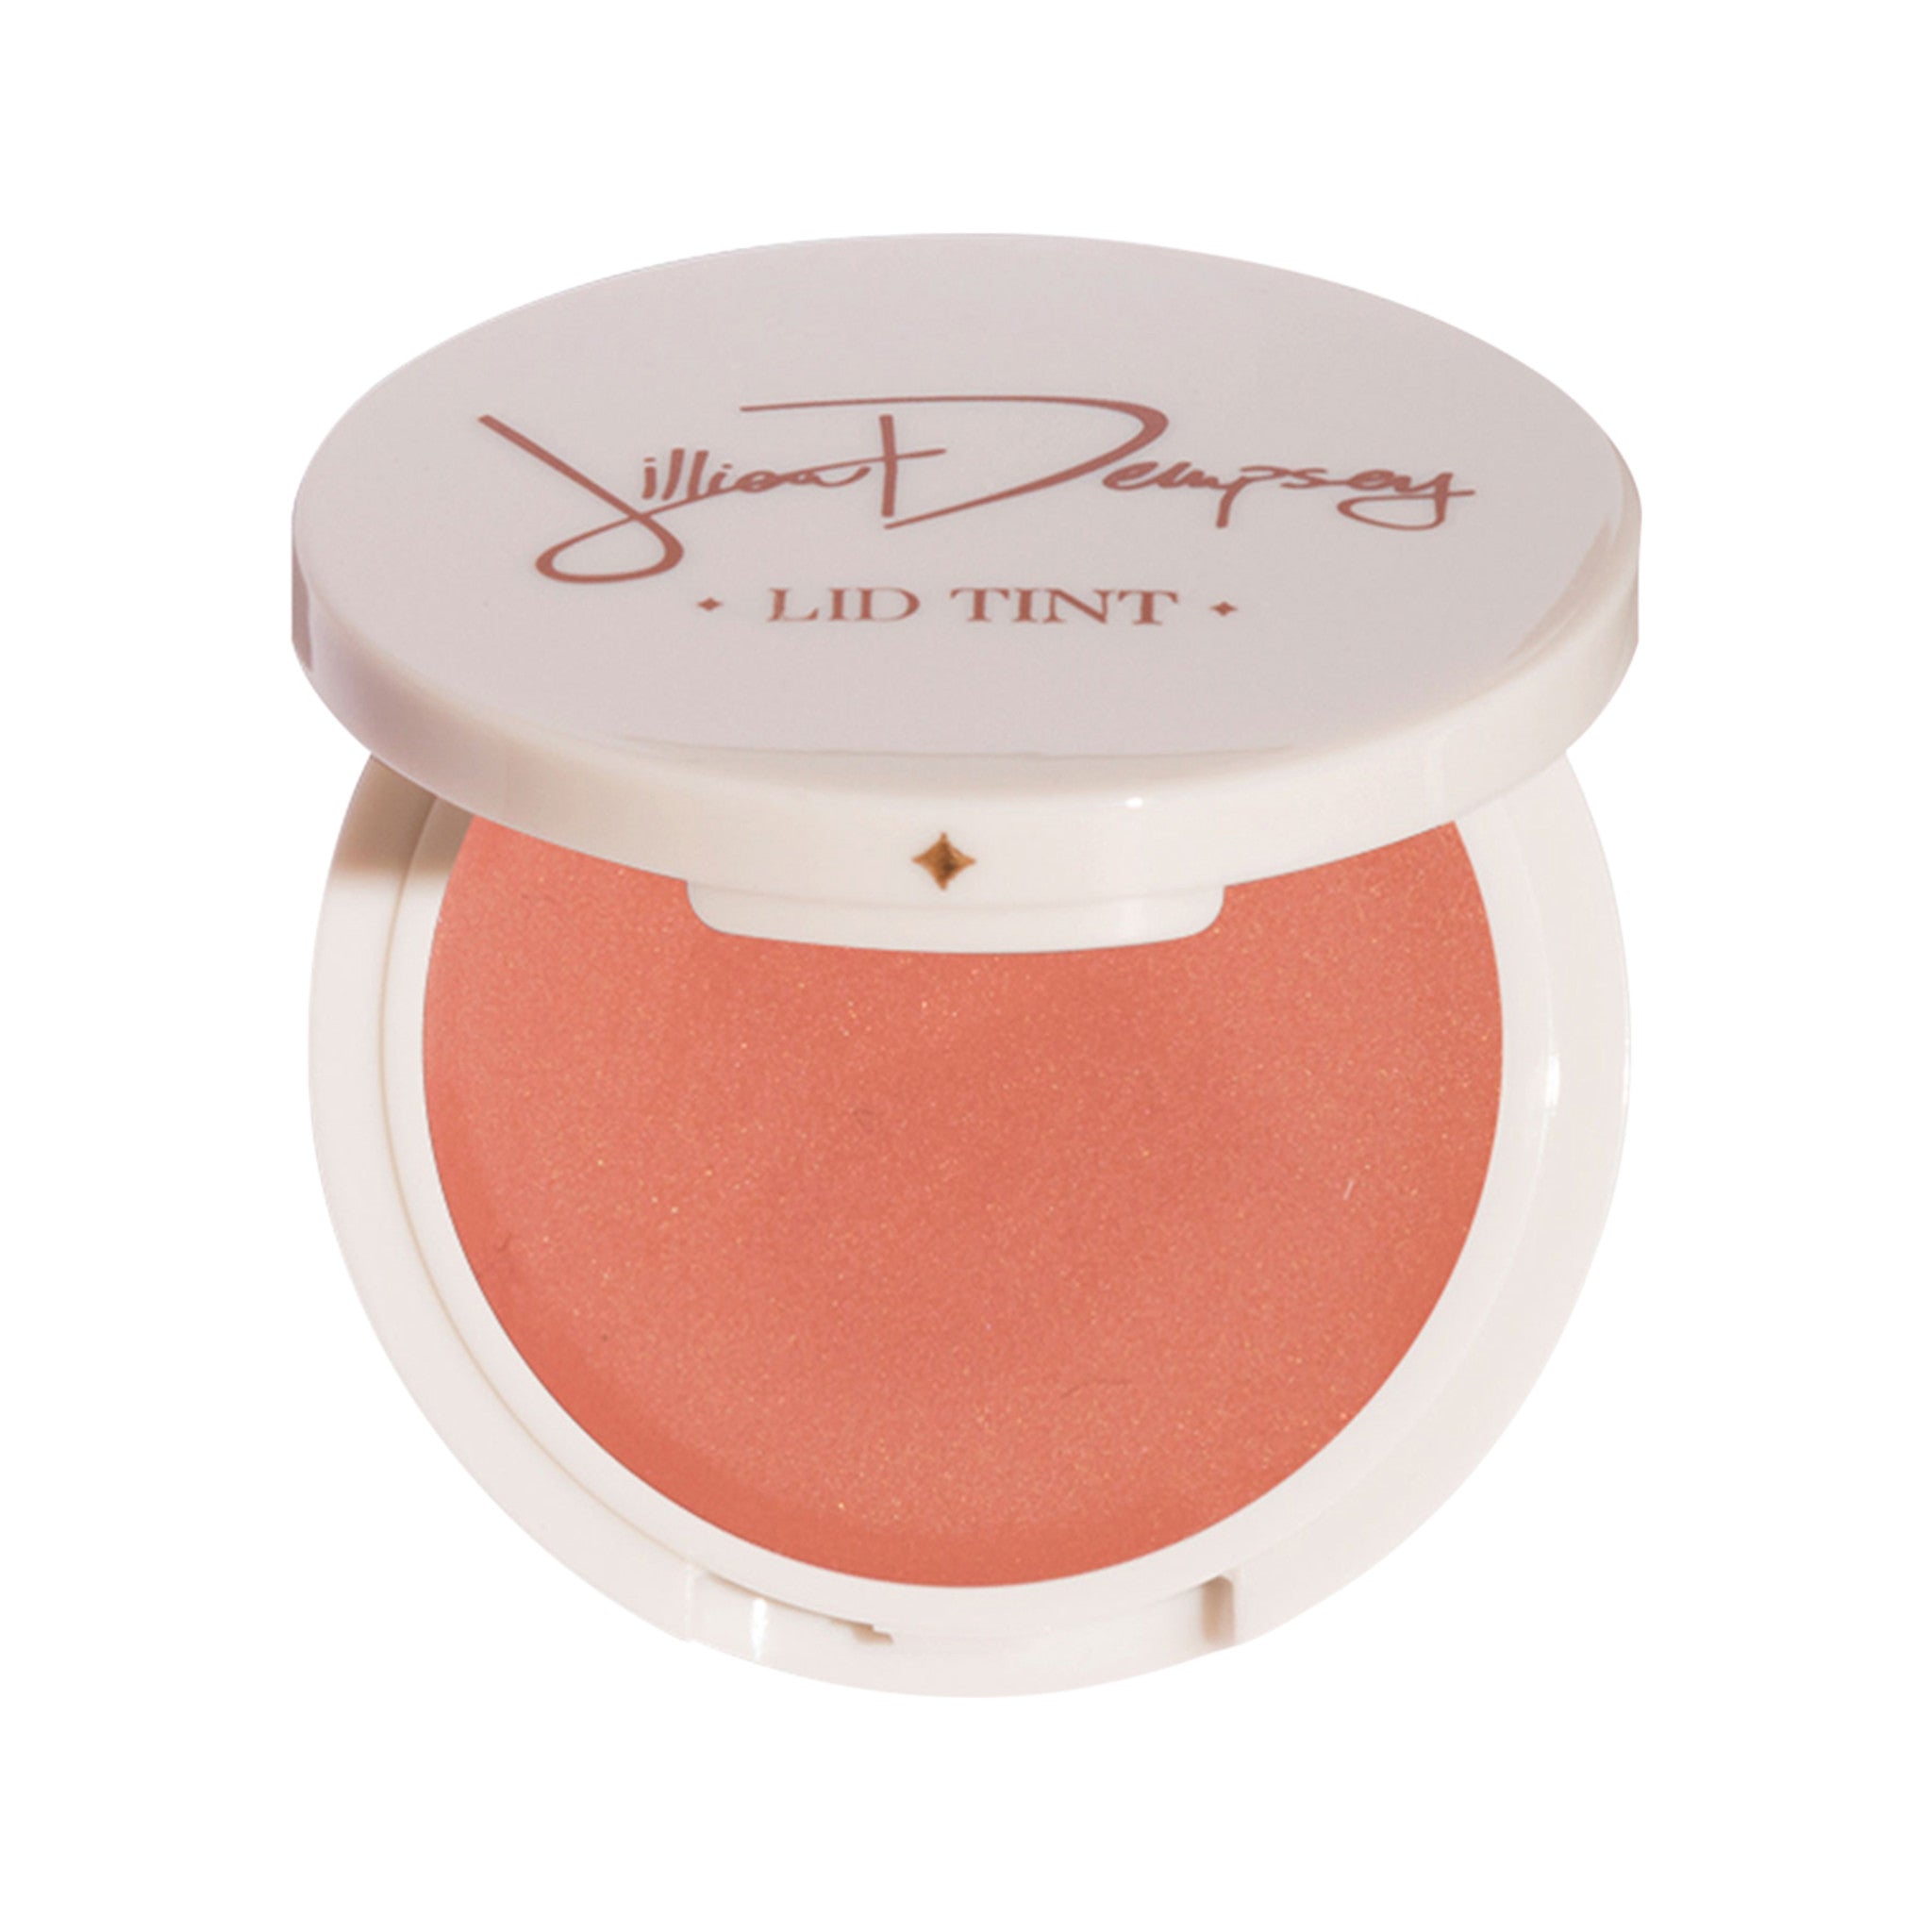 Jillian Dempsey Lid Tint Color/Shade variant: Peach main image. This product is in the color pink